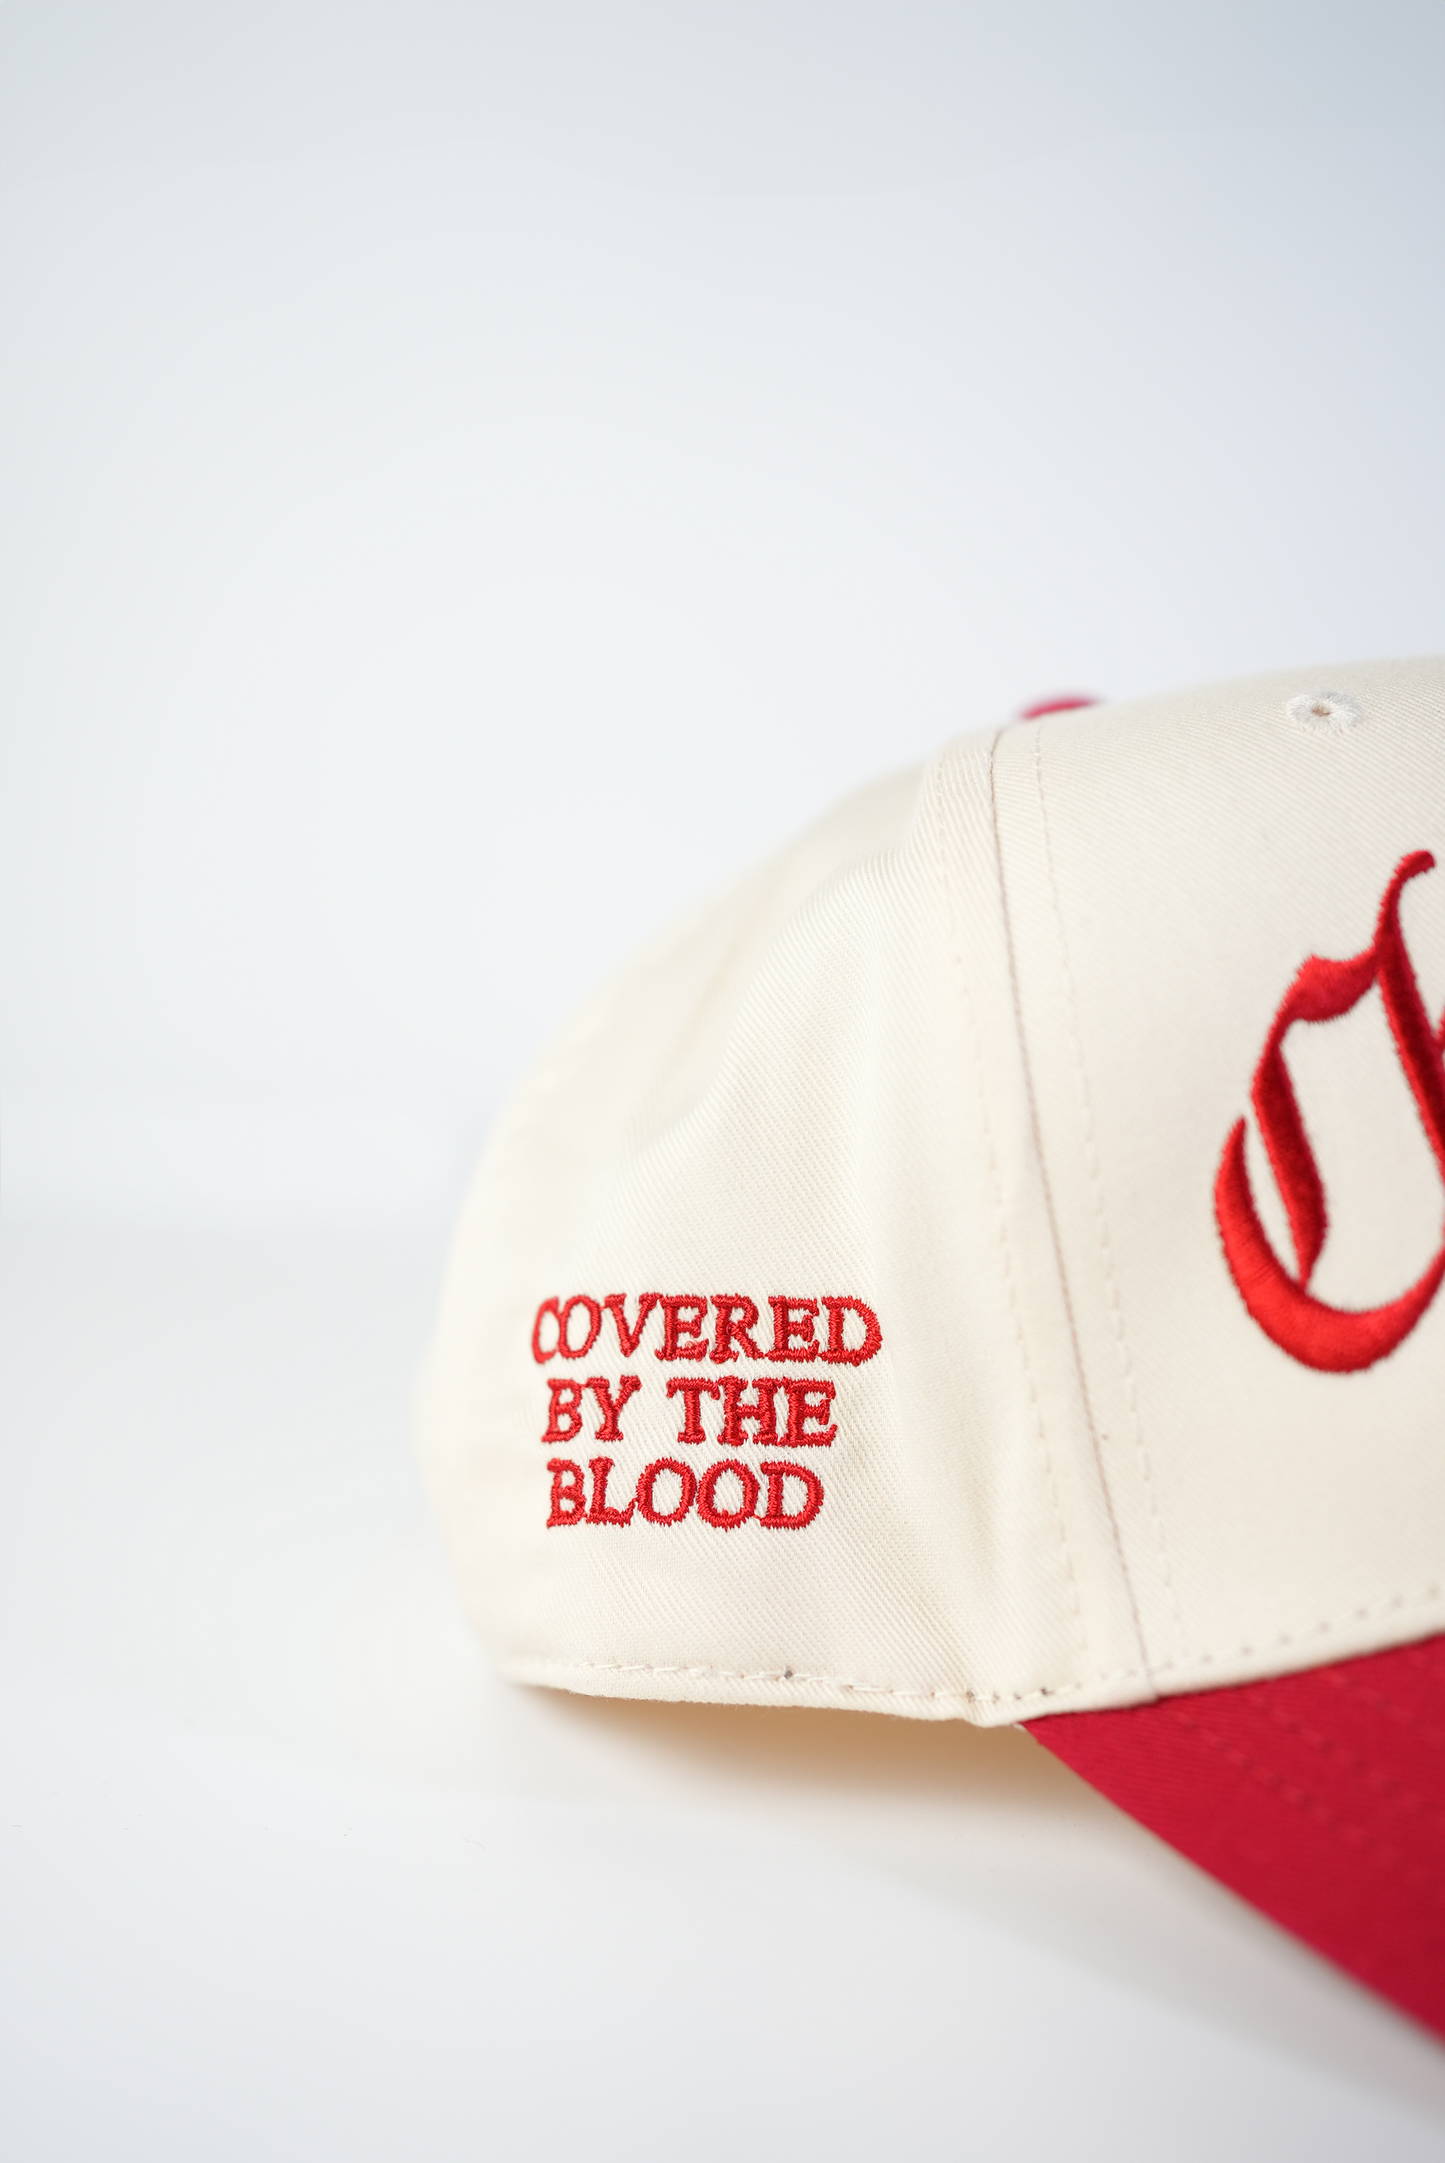 Covered by the Blood